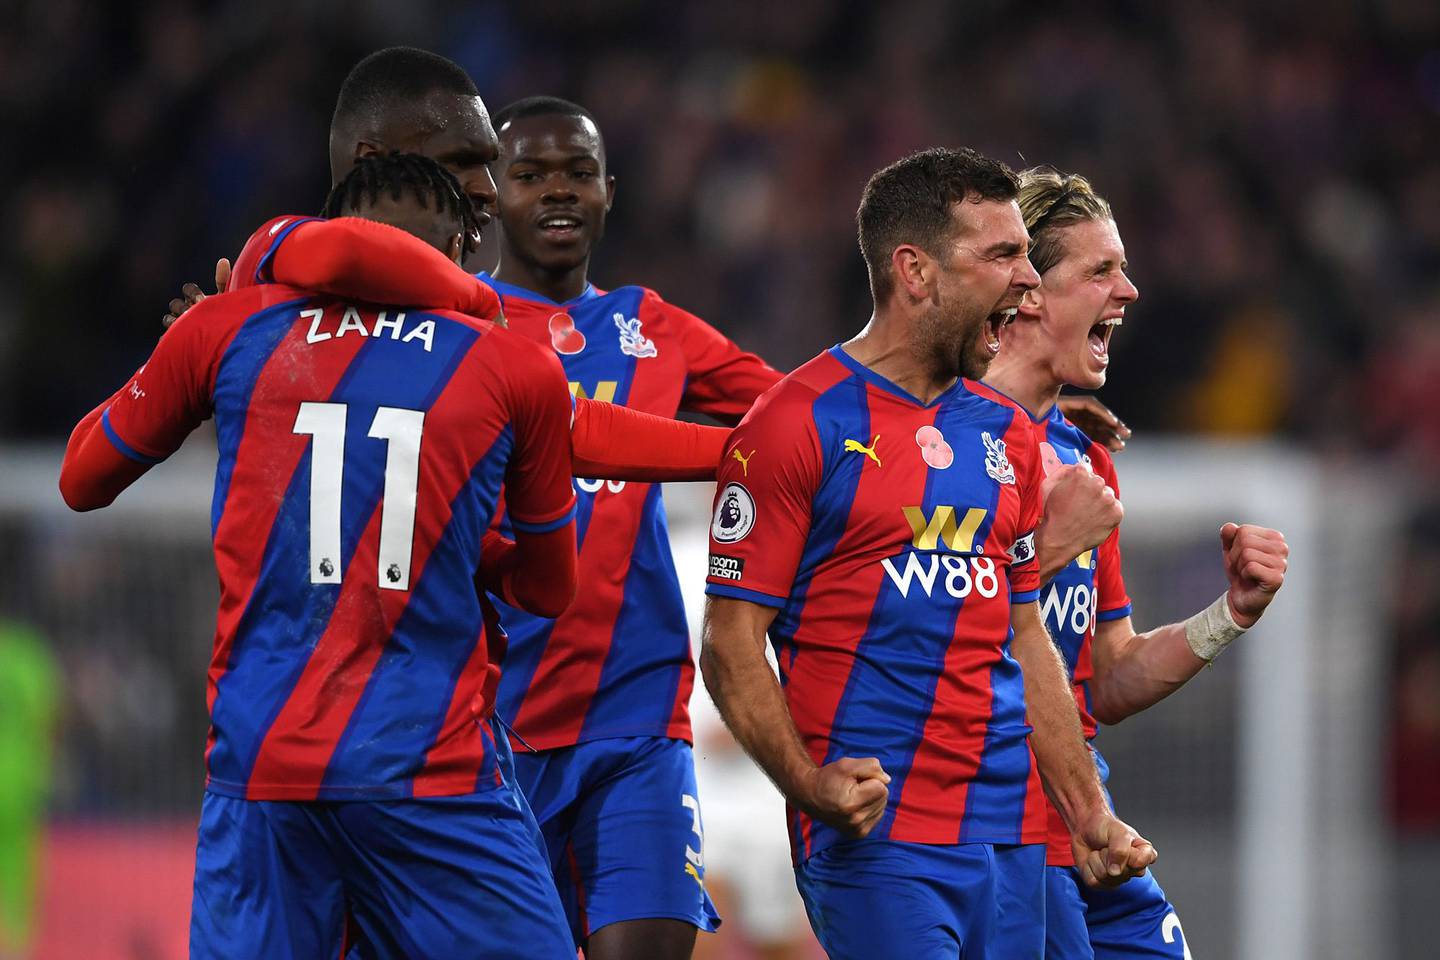 Conor Gallagher celebrates with teammates Wilfried Zaha and Christian Benteke of Crystal Palace after scoring their team's second goal during the Premier League match between Crystal Palace and Wolverhampton Wanderers at Selhurst Park on November 06, 2021 in London, England.